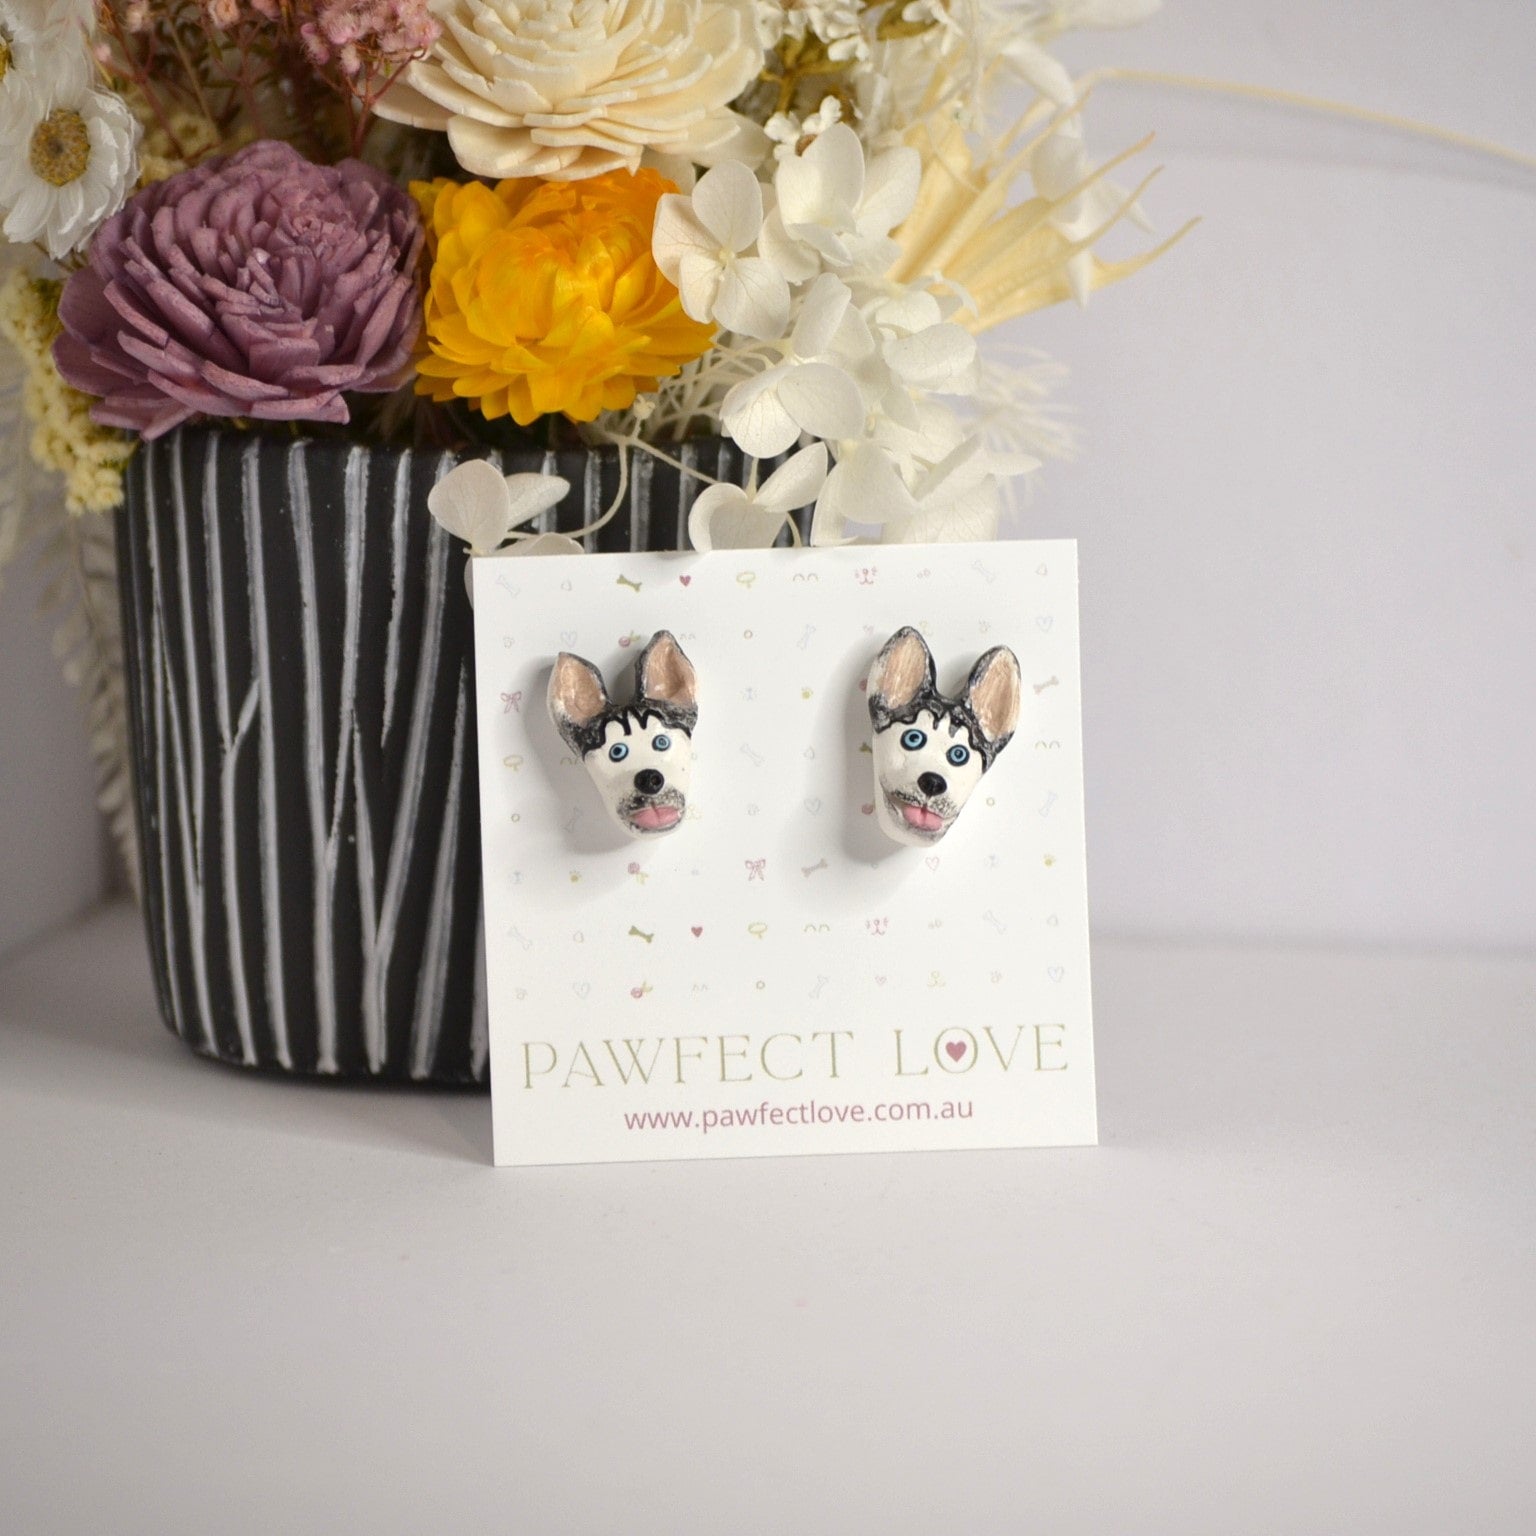 Handmade Husky stud earrings by Pawfect Love, positioned in front of dried flower arrangement